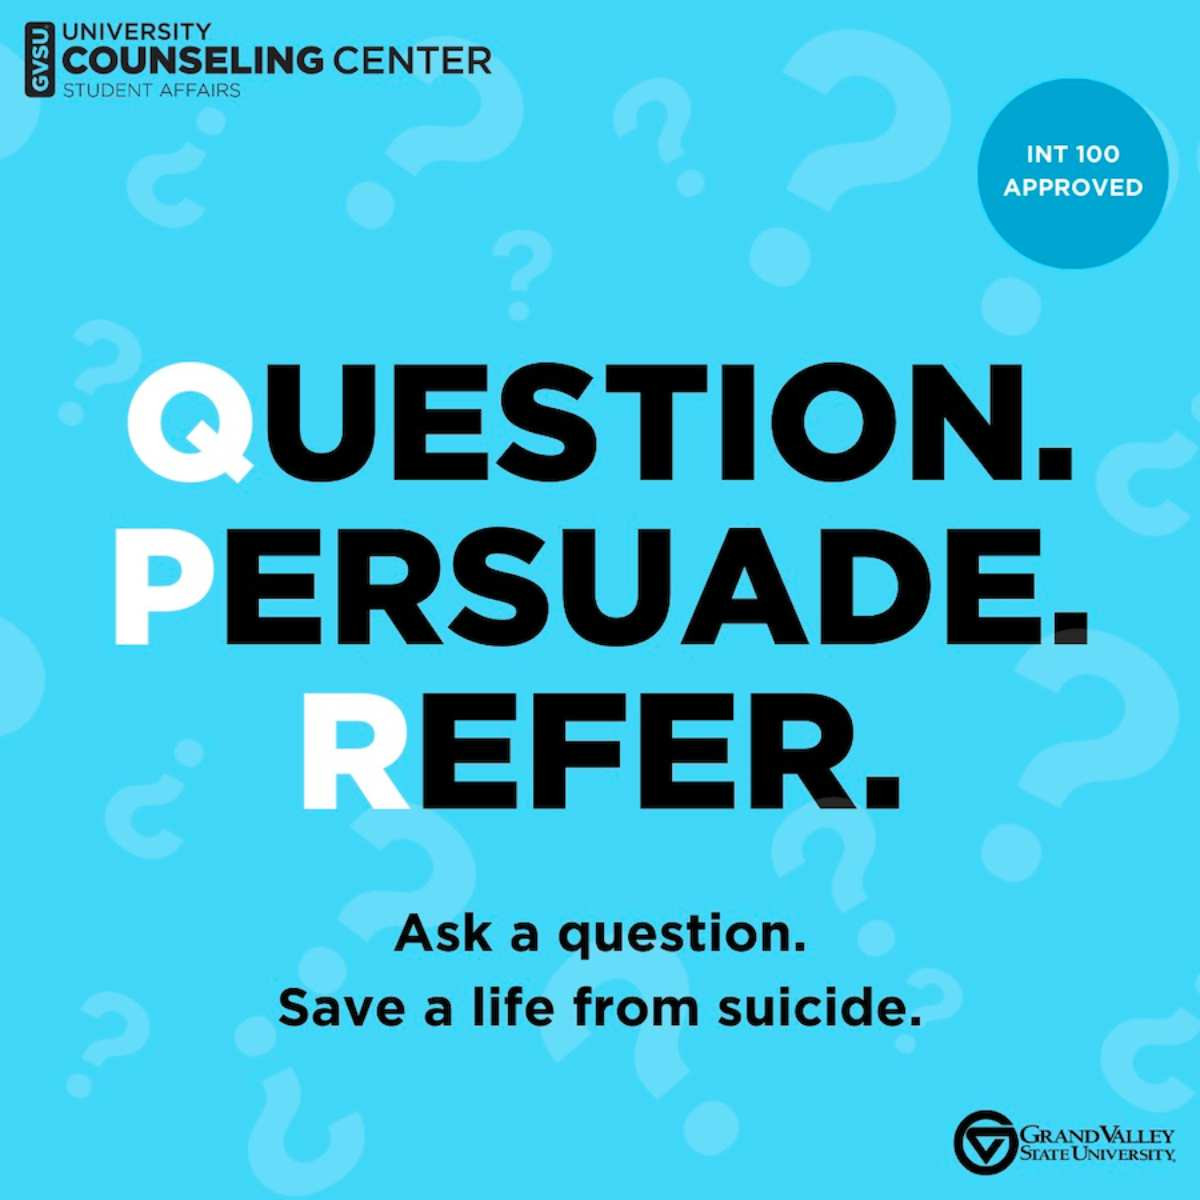 A graphic from the Uniiversity COunseing Center that says Question Persuade Refer "Ask a question, save a life from suicide" and it is INT 100 approved